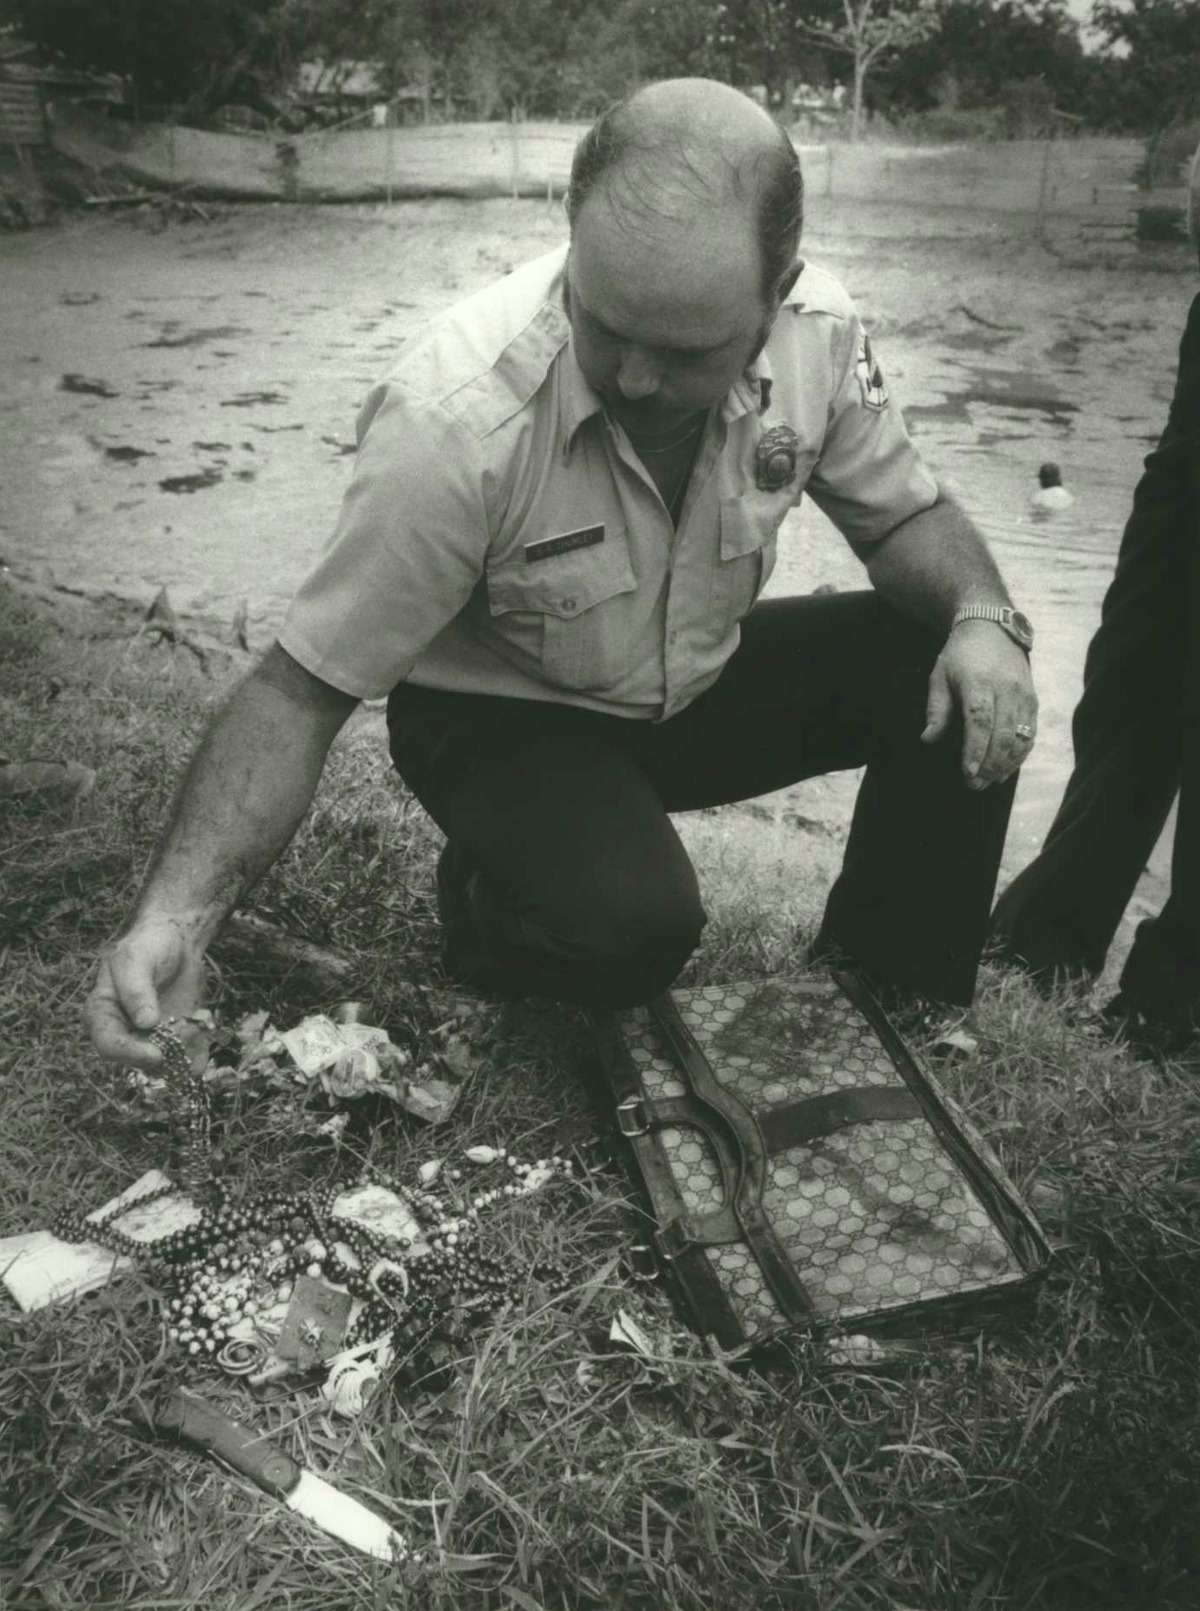 Sept. 14, 1984: Houston Capt. S.R. Chumley of the Houston Fire Department looks at jewelry and a purse and knife found by HPD drive team in a pond in the 2000 block of Charles. Police divers, investigating a burglary ring, found a knife and a purse containing what appeared to be costume jewelry at the bottom of a pond at 2010 Charles. The house at that address has no connection with the ring, police said. Officers believe the burglary ring was involved in the attempted capital murder of a police sergeant who tried to arrest members of the group several weeks prior. He was shot at, but not hit. Investigators had expected the pond to be 25 feet deep, but it has dried to the 6-foot level. The Fire Department pumped out most the water, and police used a metal detector to search for evidence.